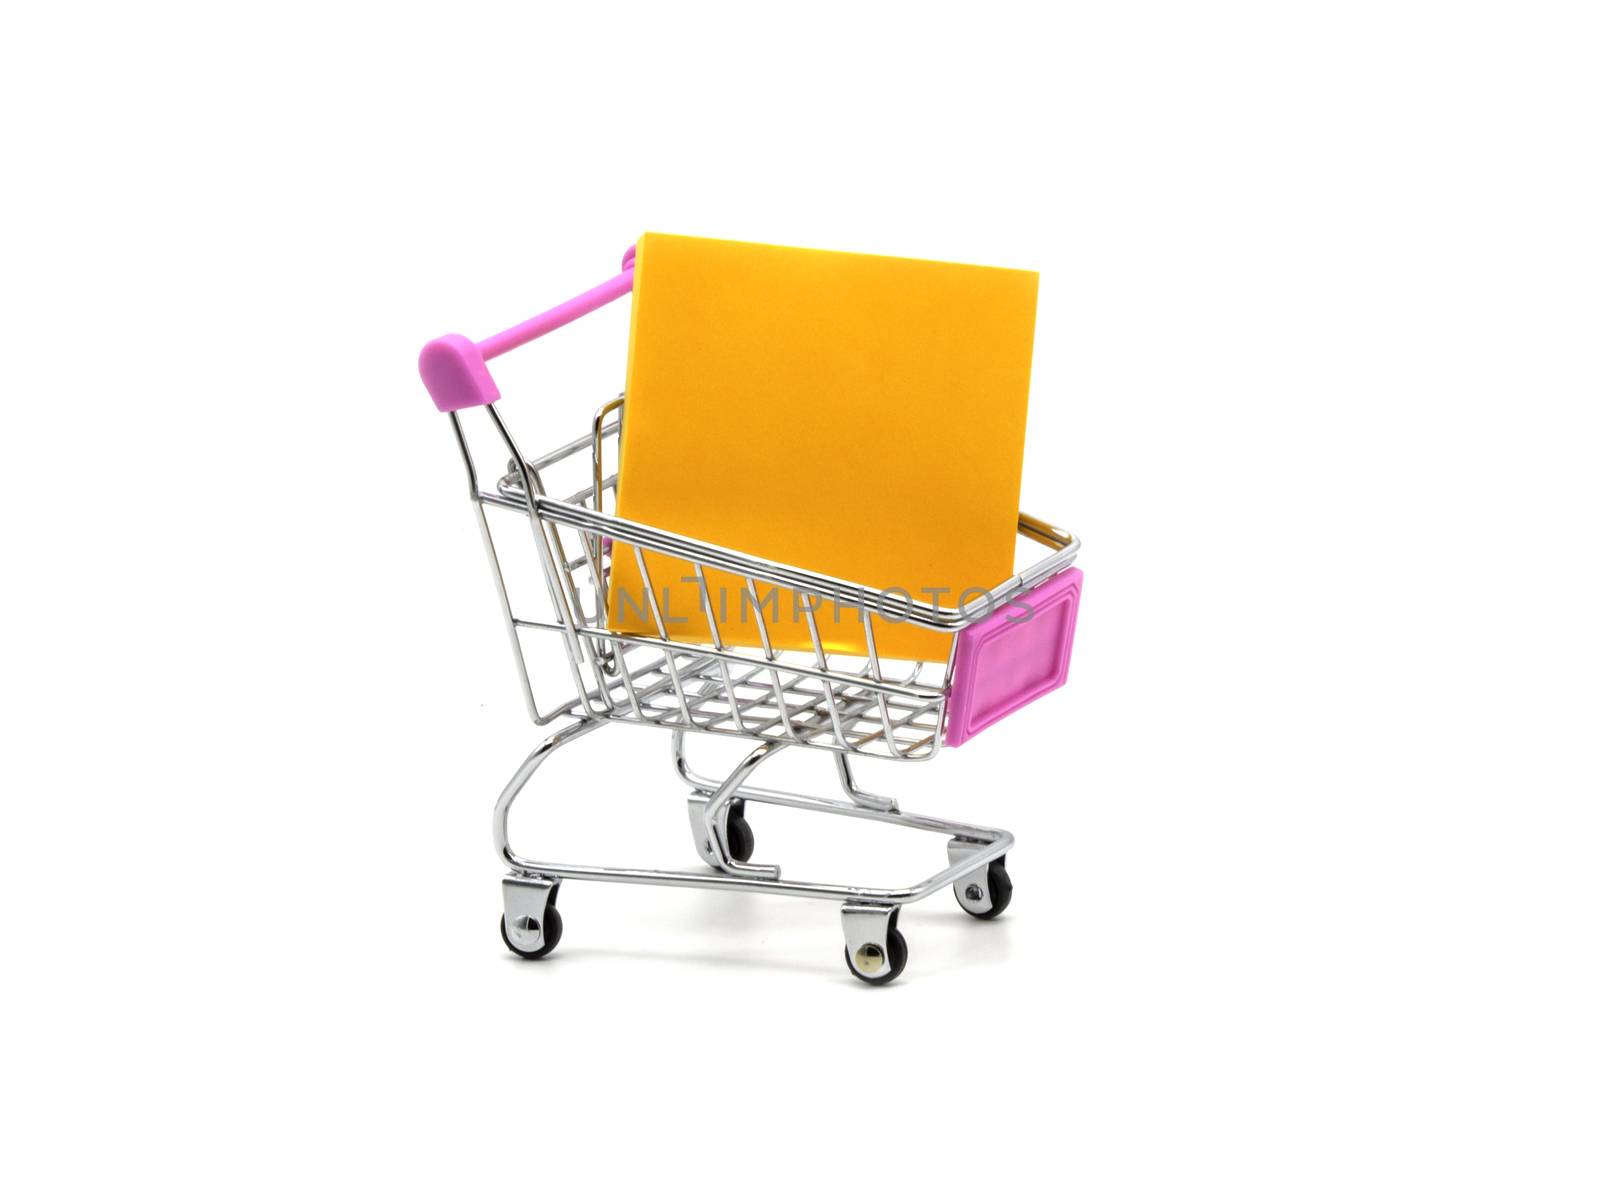 Sticky note and shopping cart isolated and white background.